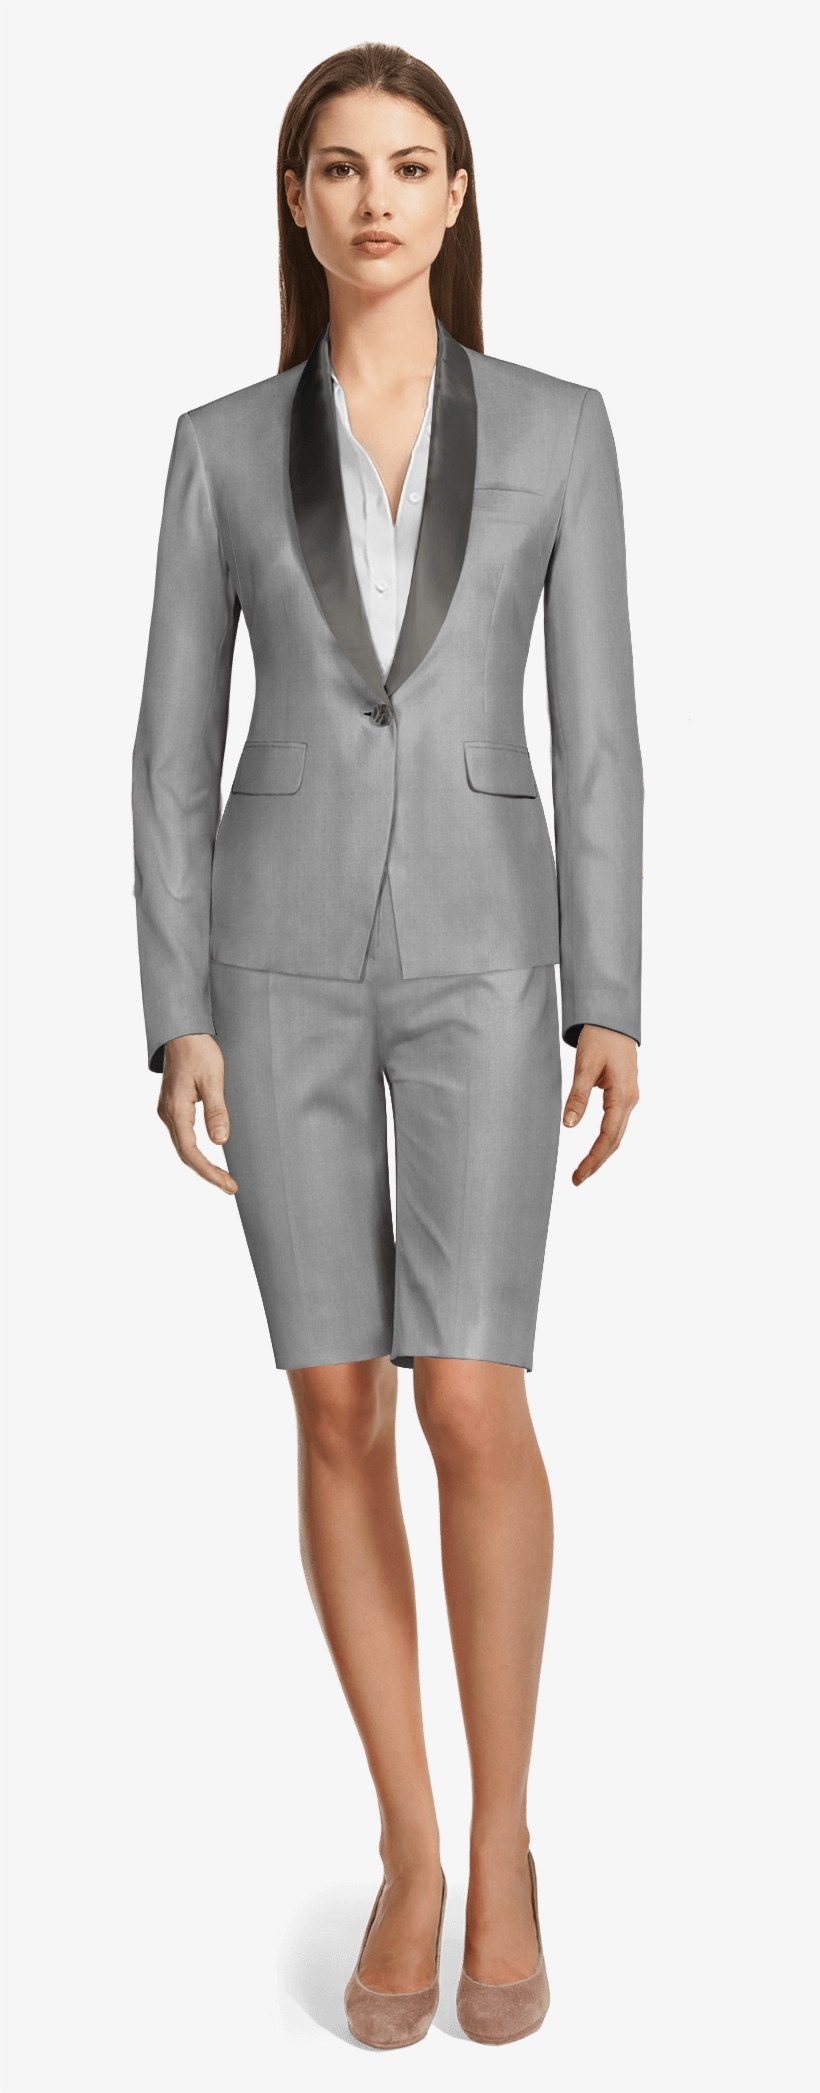 Grey Polyester Tuxedo - Bermuda Suits For Women, transparent png #8938650